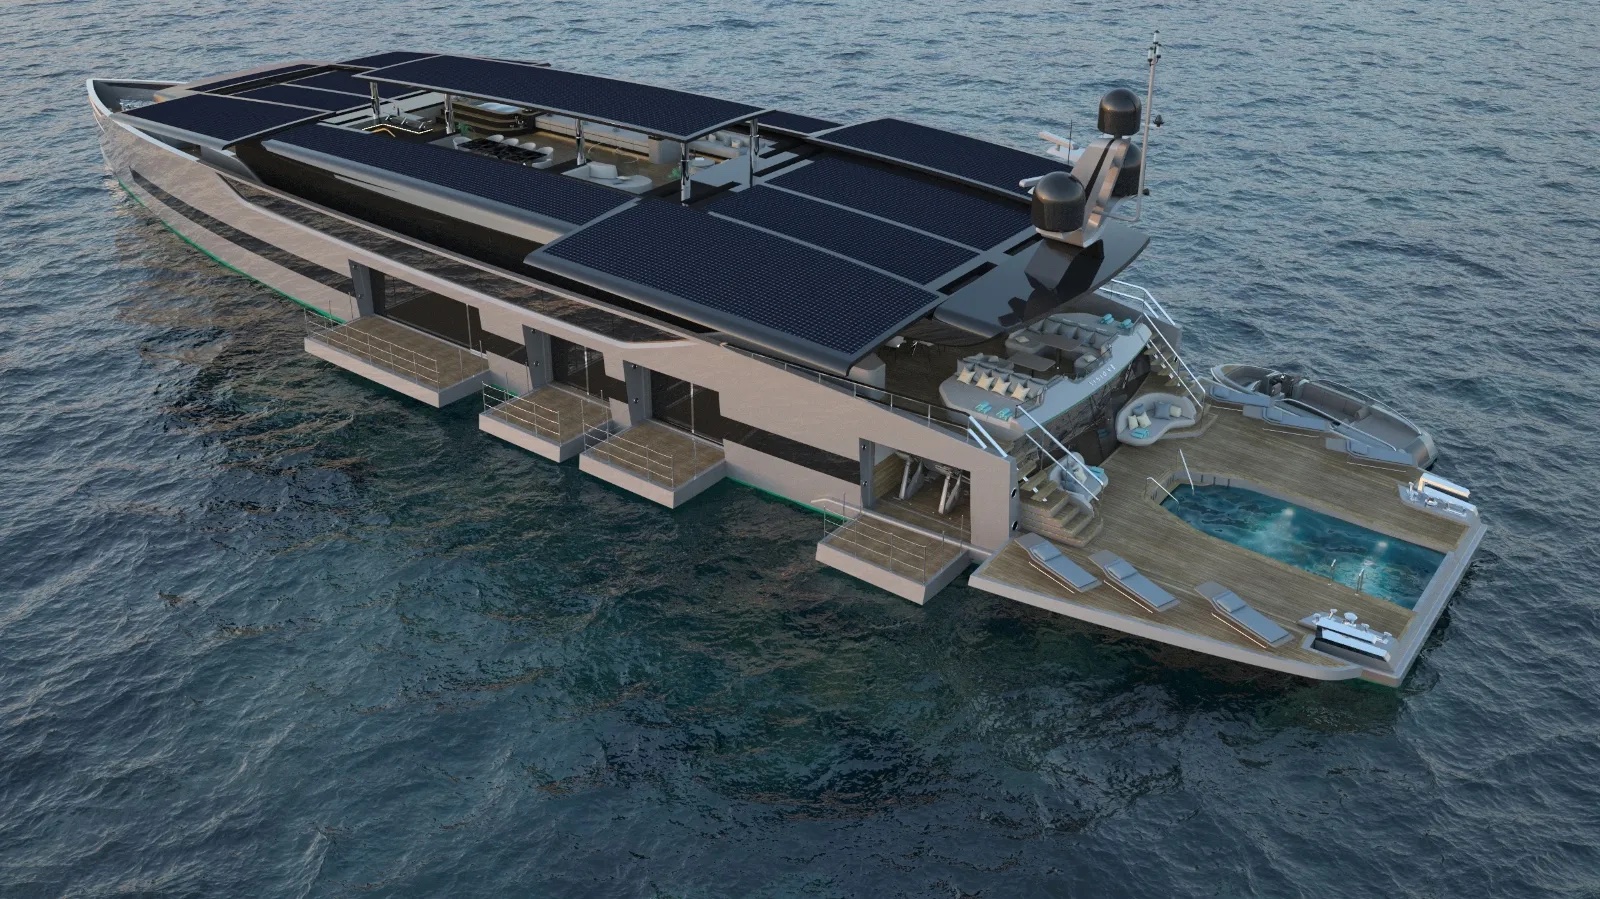 Concept Yacht VisionE aerial angle with decks open